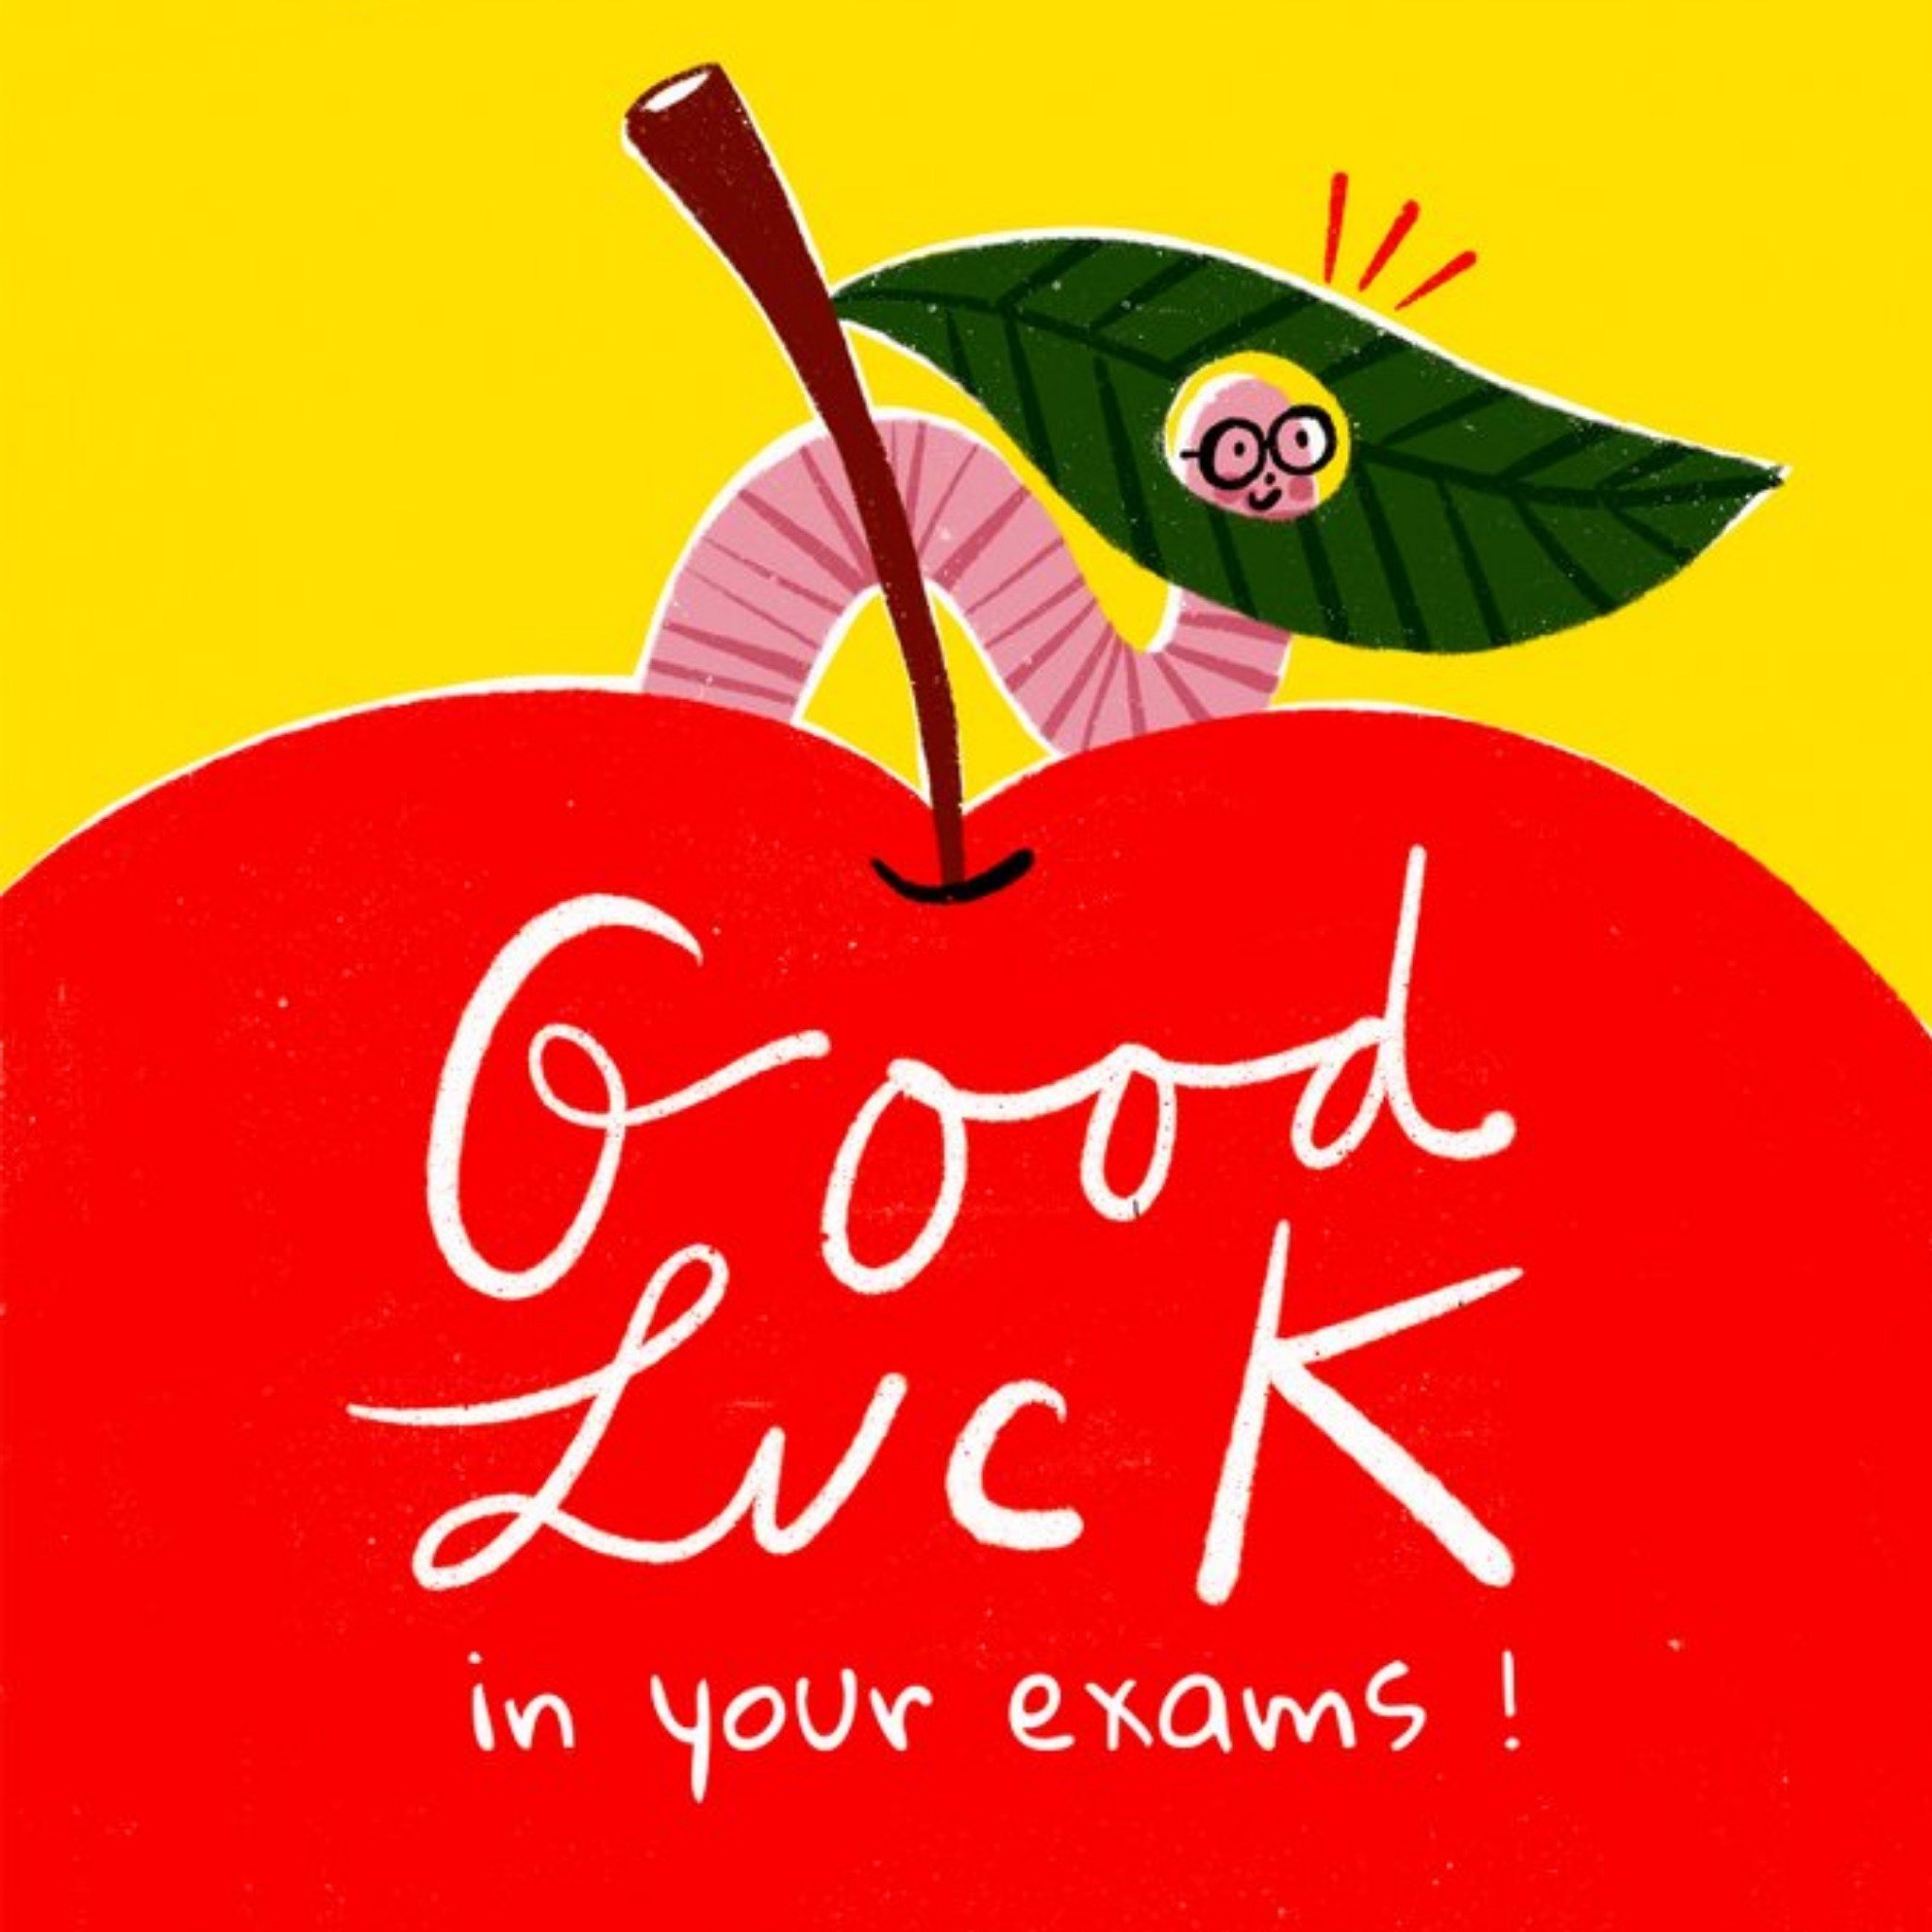 Moonpig Illustration Of A Book Worm On The Top Of A Red Apple Good Luck In Your Exams Card, Large